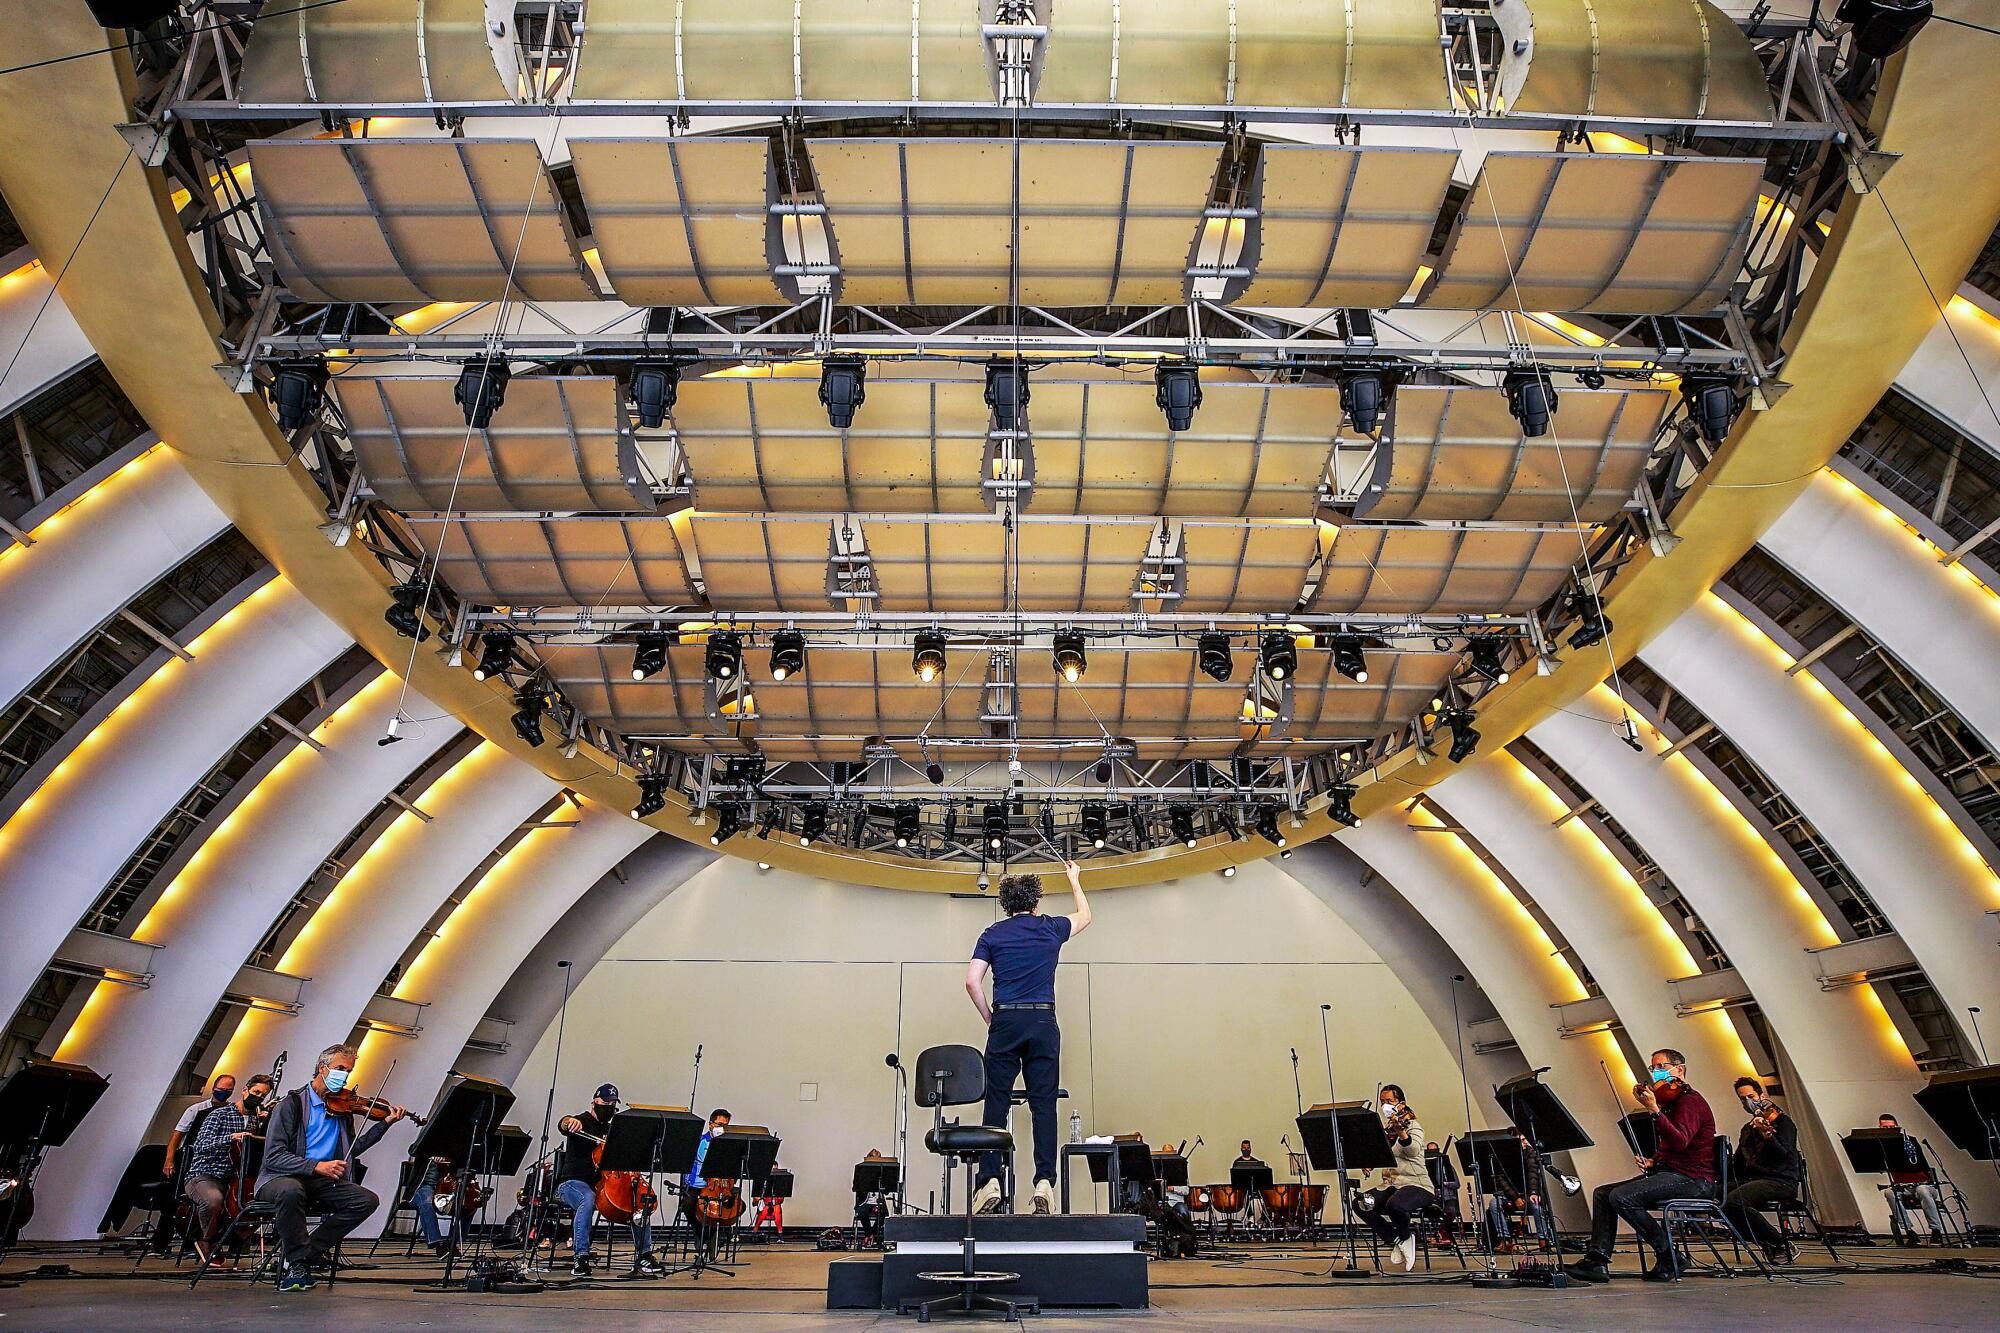 A wide view of a stage. A conductor in jeans bounces on his toes as he lifts a baton and masked musicians perform.